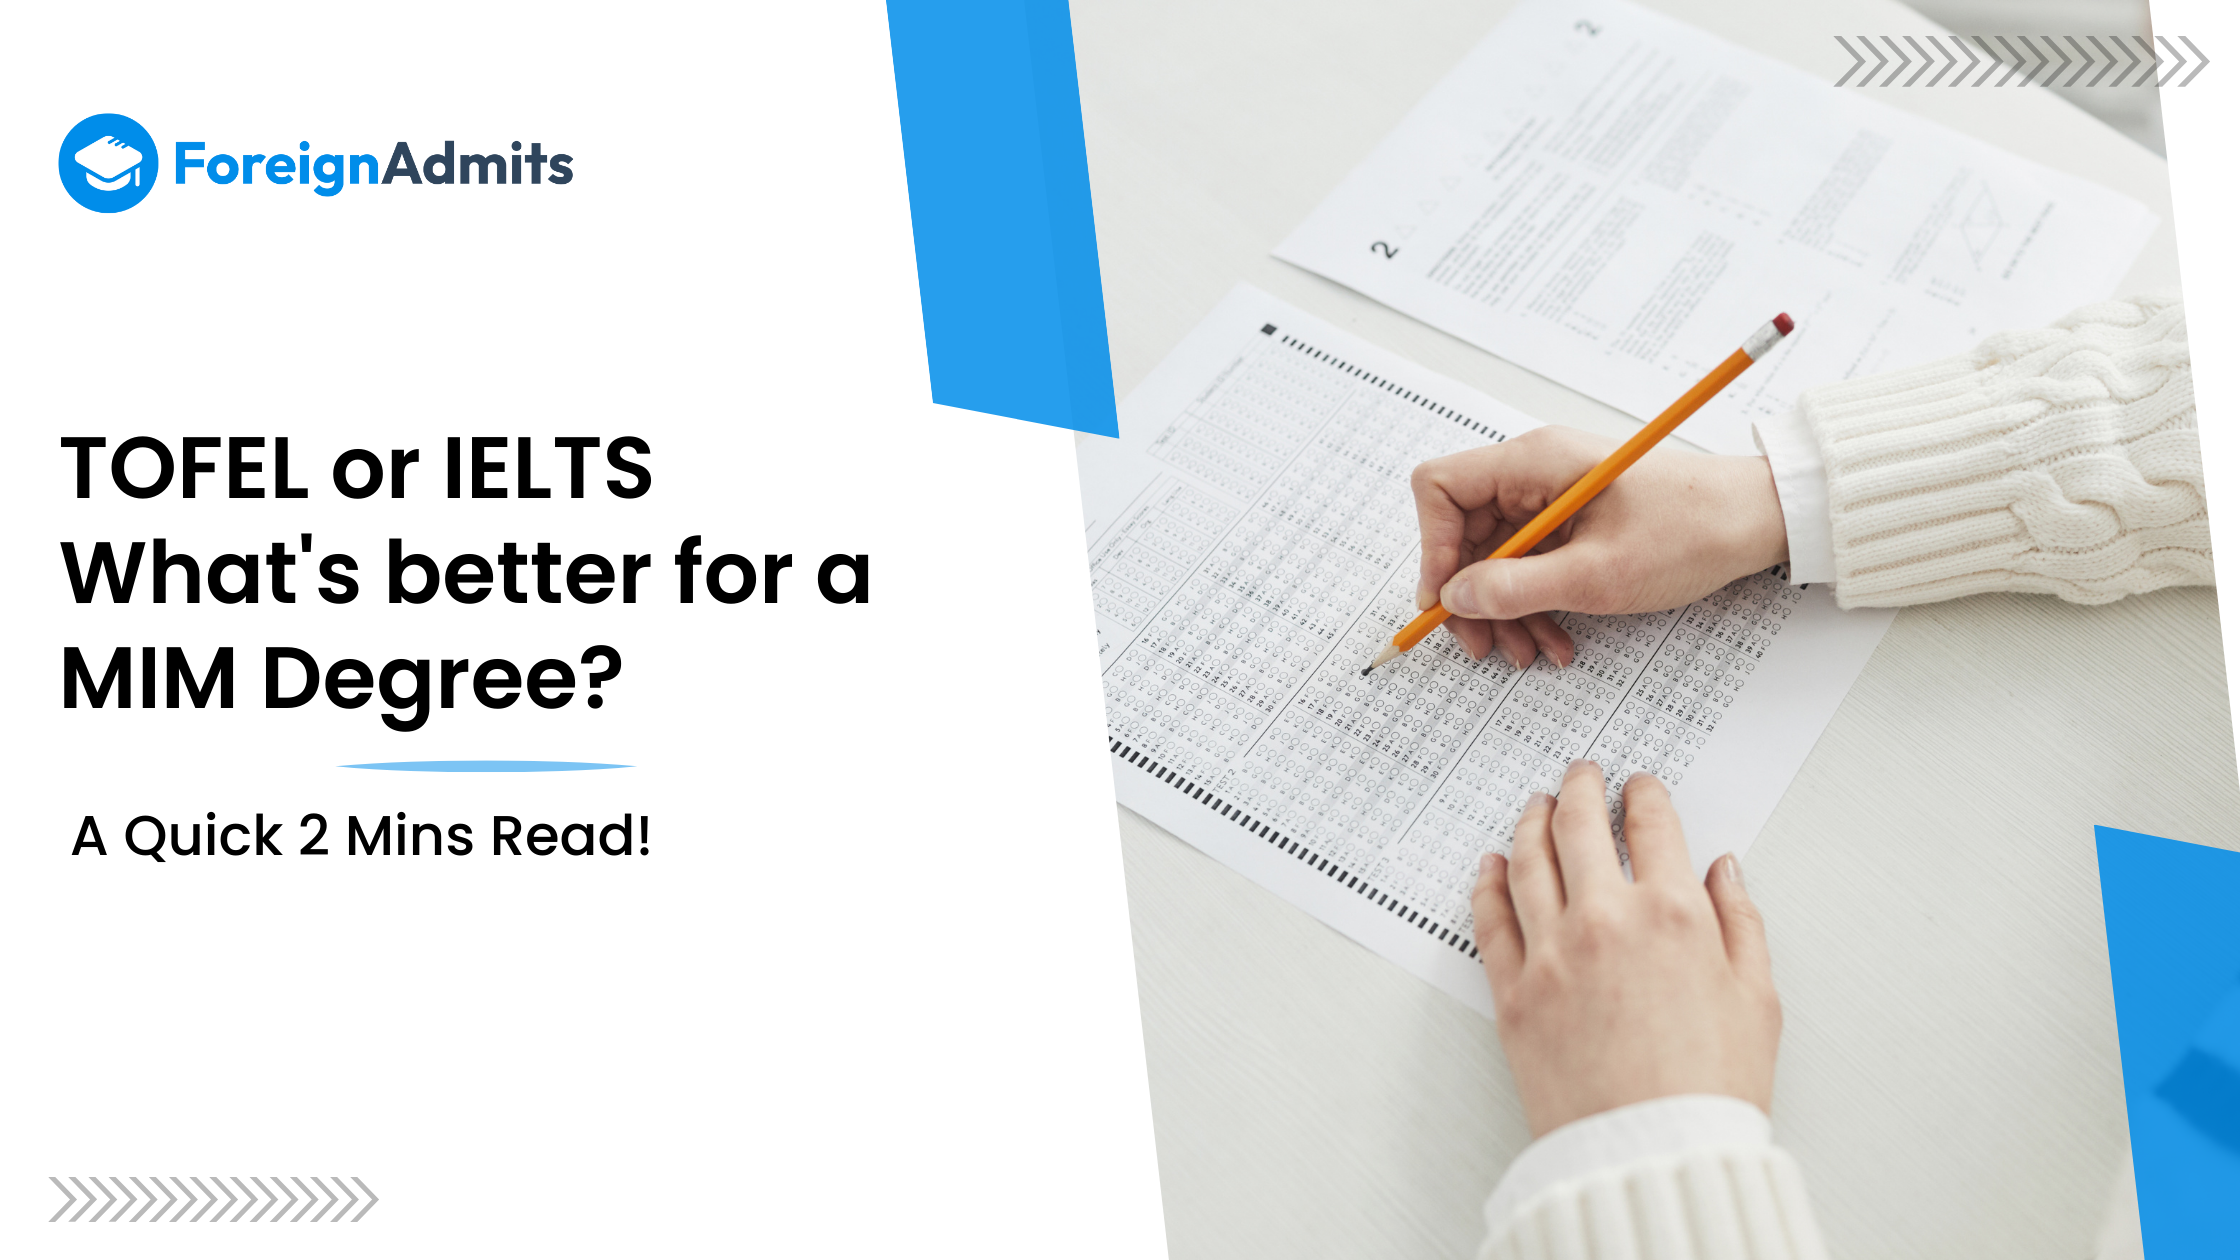 TOEFL or IELTS – What’s better for a MIM degree?